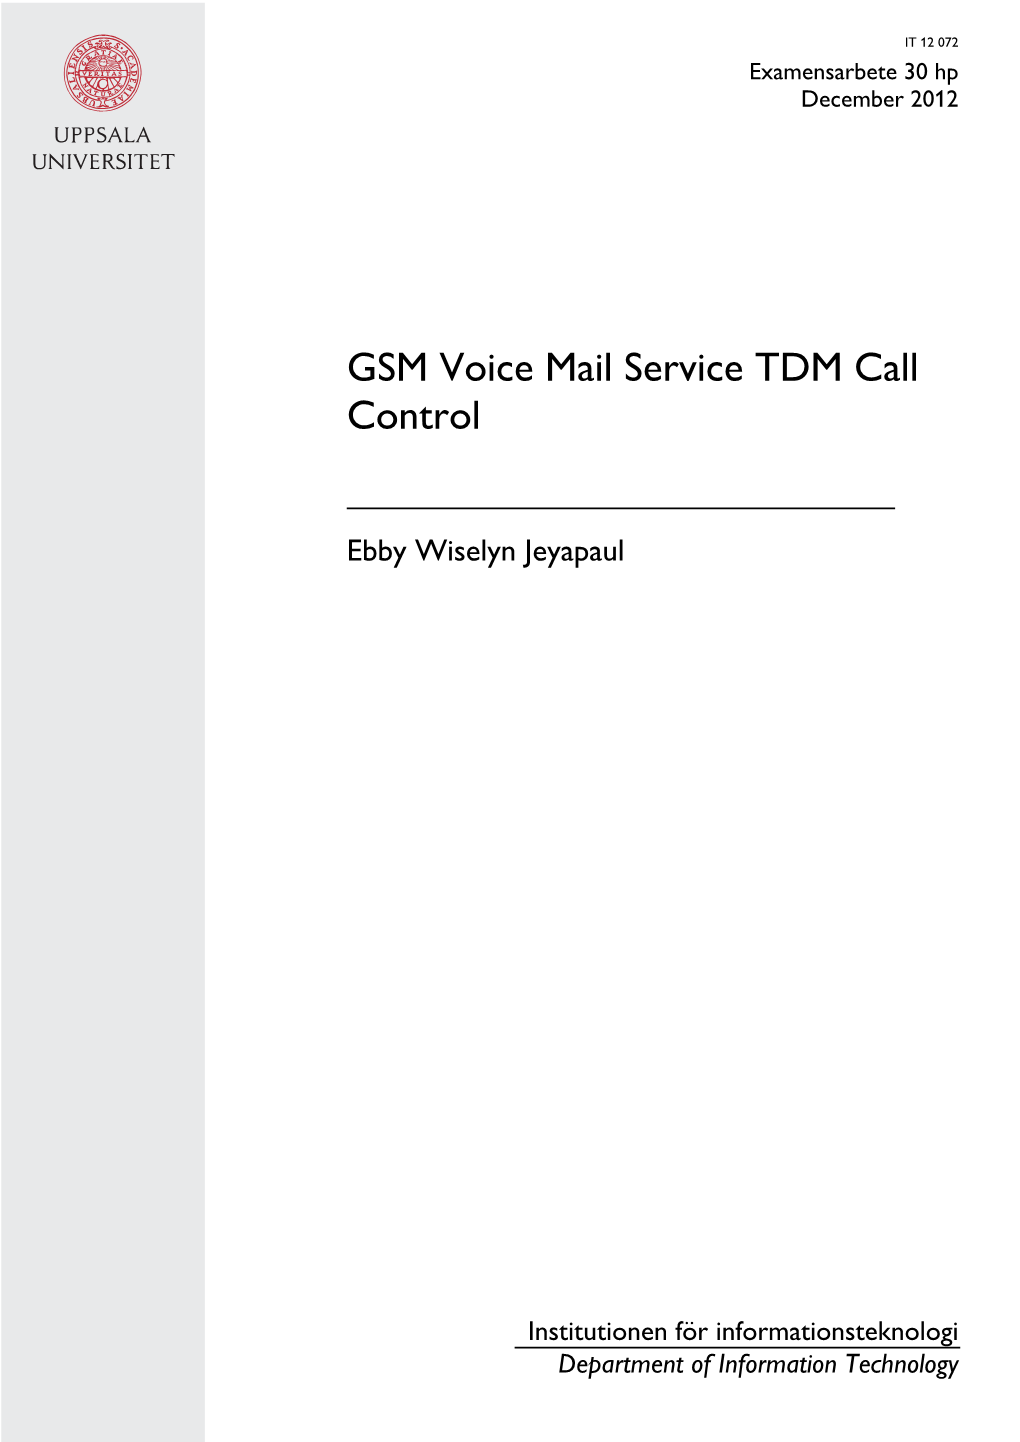 GSM Voice Mail Service TDM Call Control